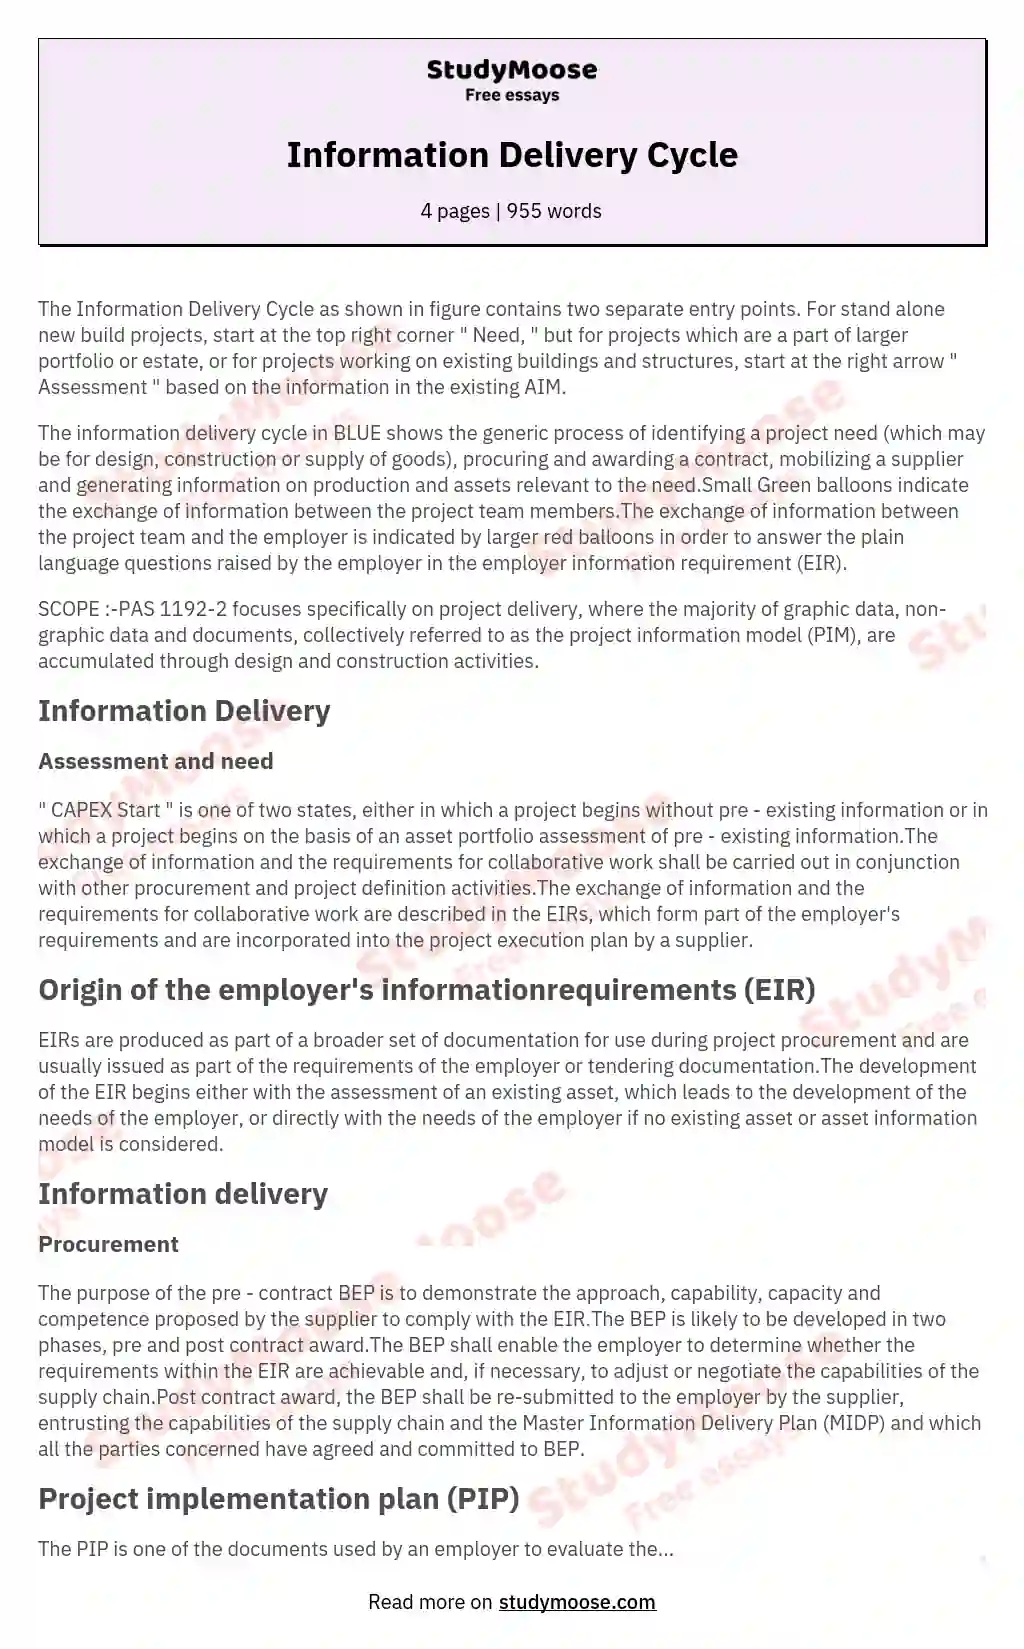 Information Delivery Cycle essay